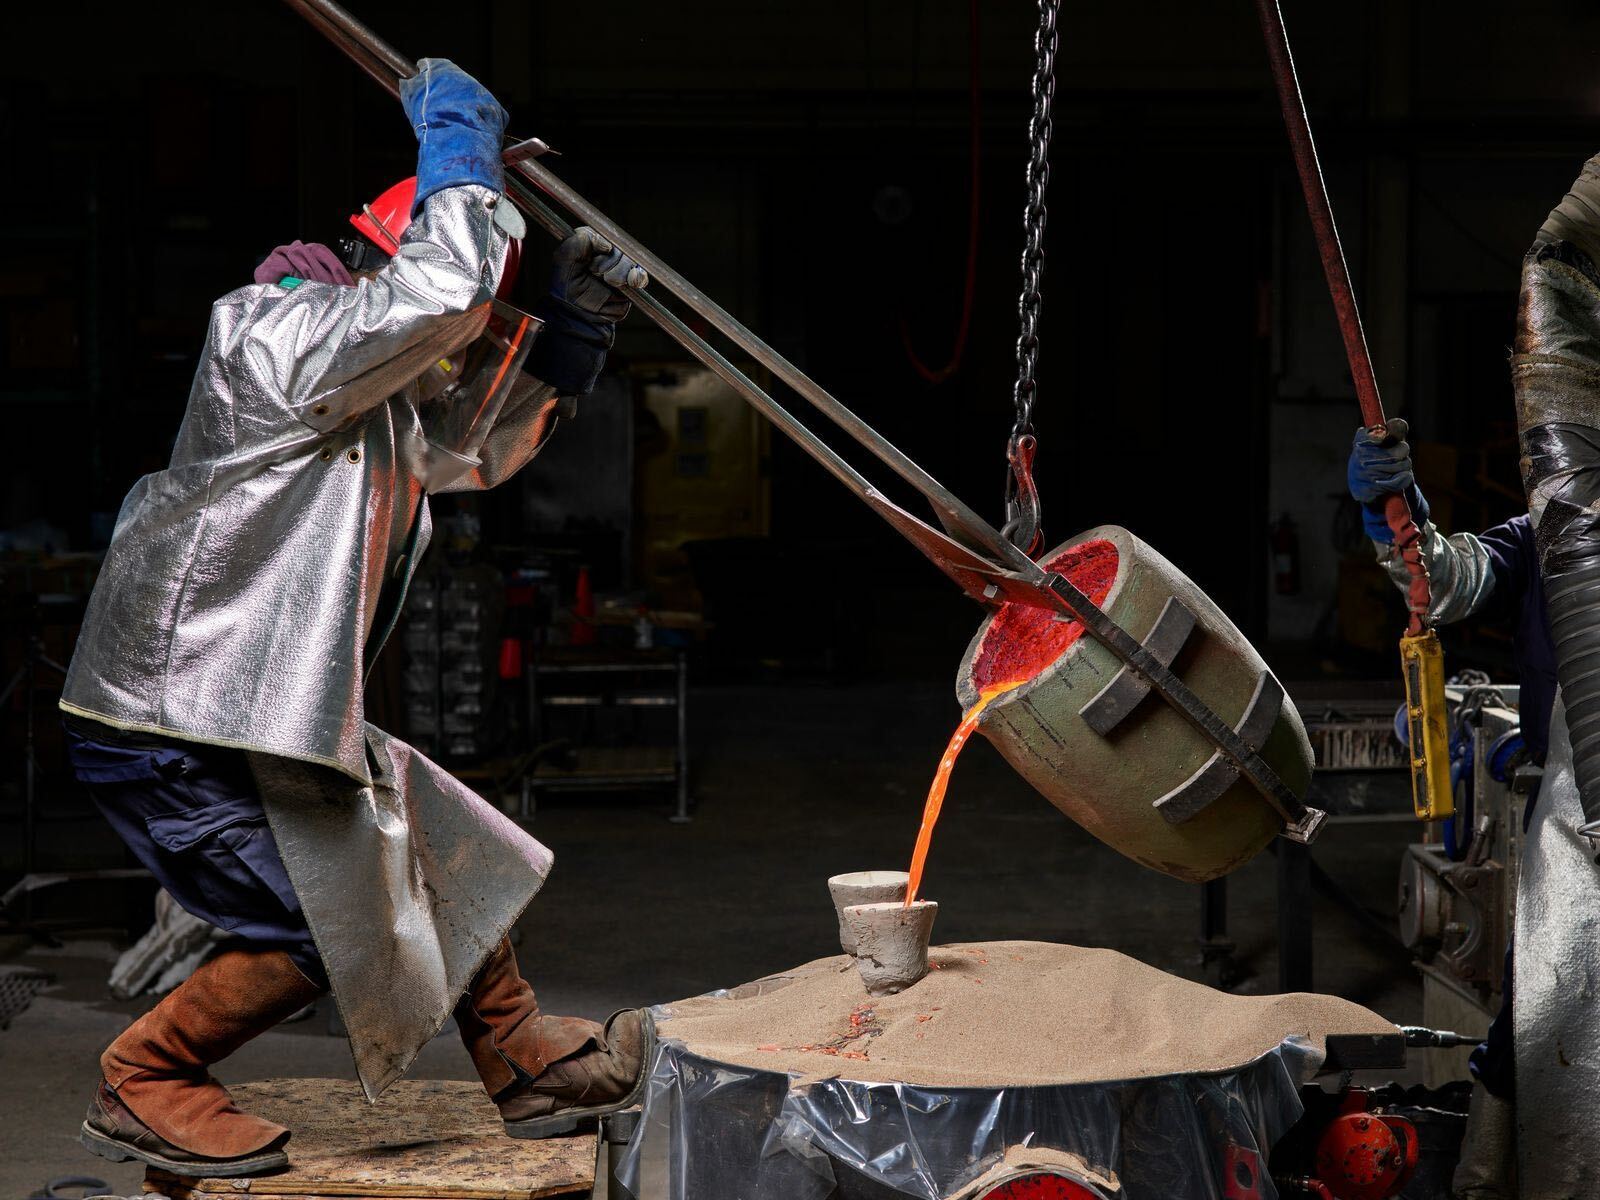 Silicon bronze is poured into a hollow vessel to make Oscar statuettes in Rock Tavern, New York.